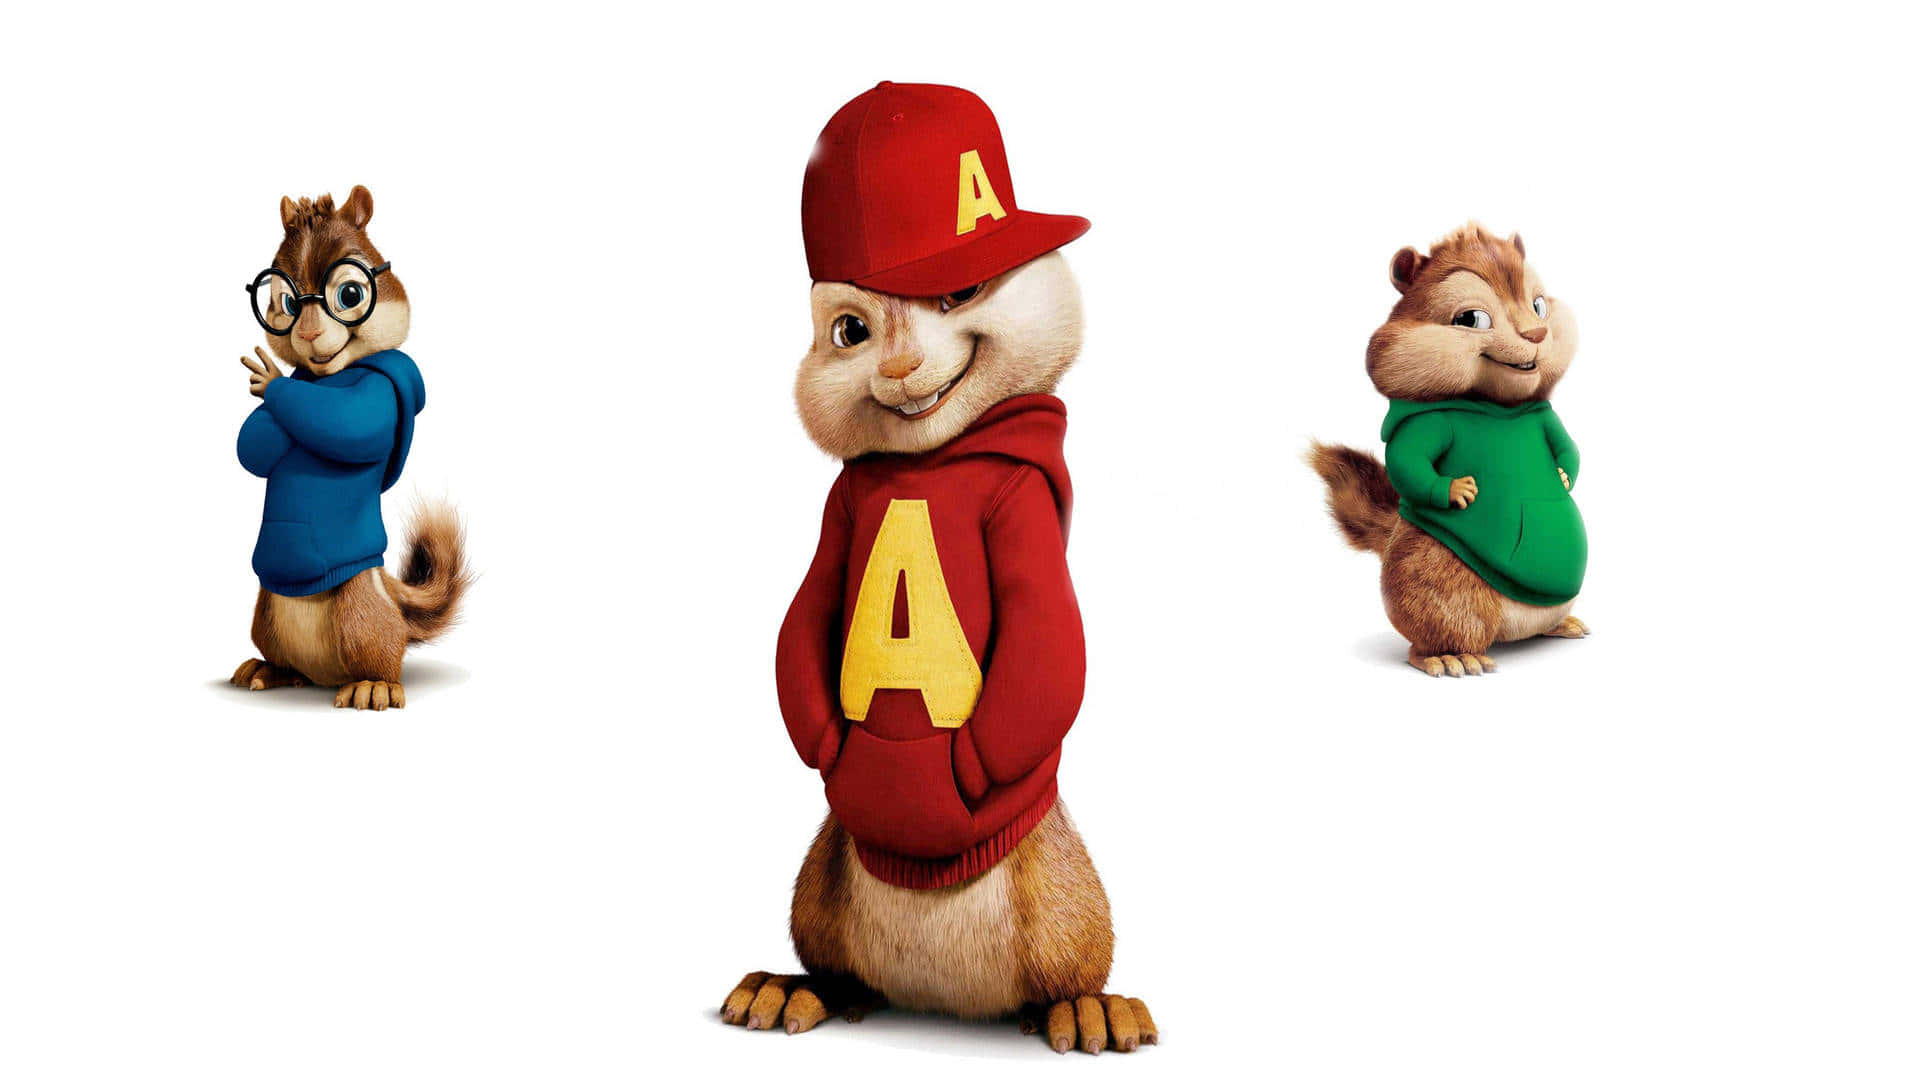 Have Fun with Alvin and The Chipmunks